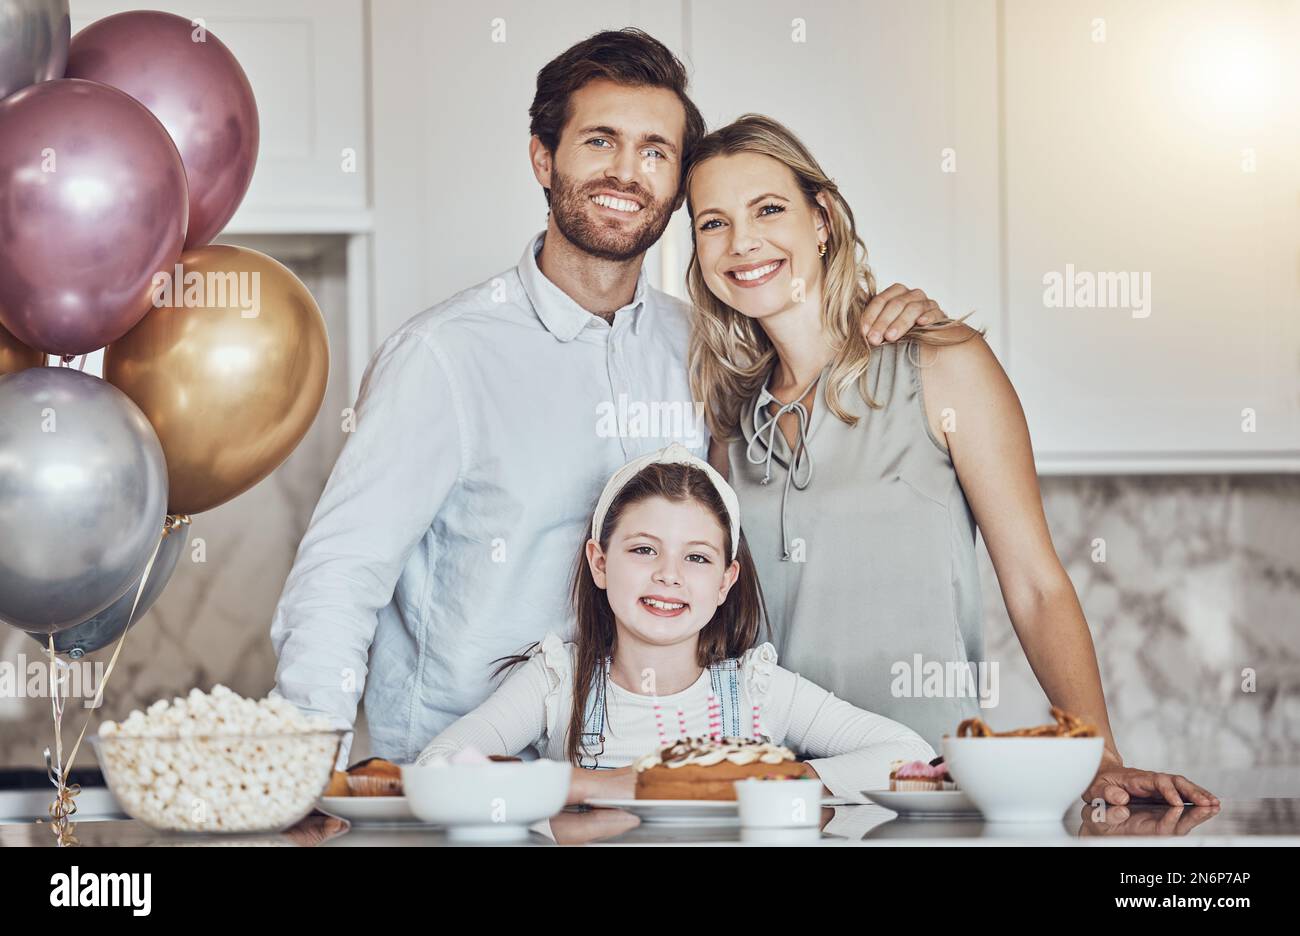 Portrait, family or girl in celebration of a happy birthday in a house party or kitchen with a smile popcorn or cake. Mother, dad or child bonding or Stock Photo